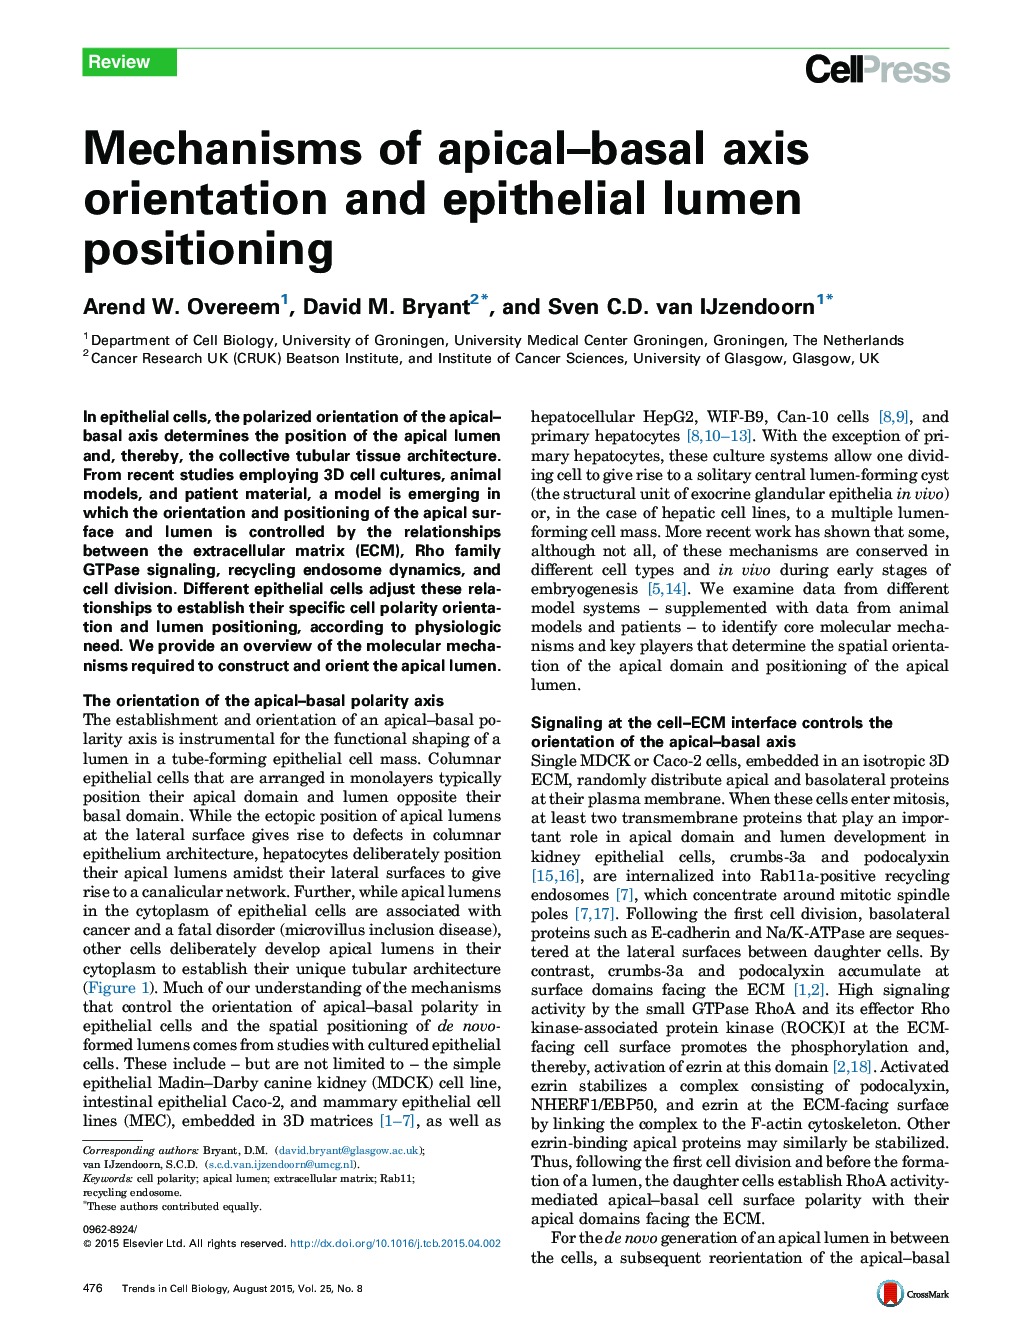 Mechanisms of apical–basal axis orientation and epithelial lumen positioning